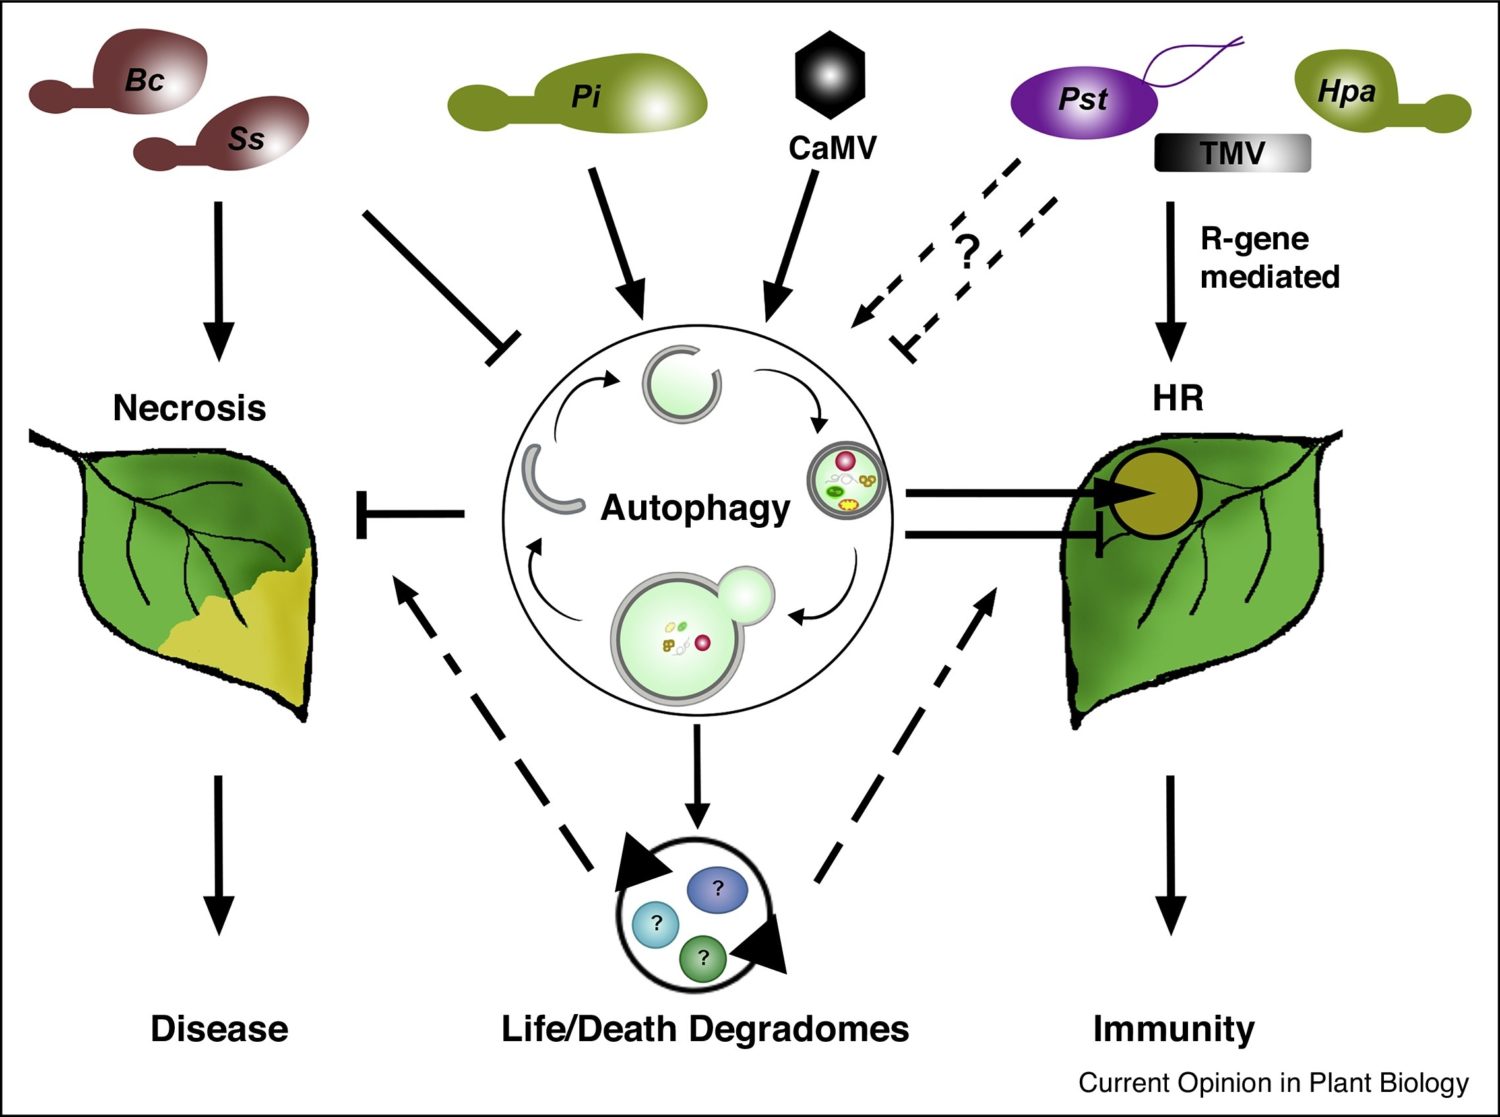 Plantae Review Autophagy as a mediator of life and death in plants